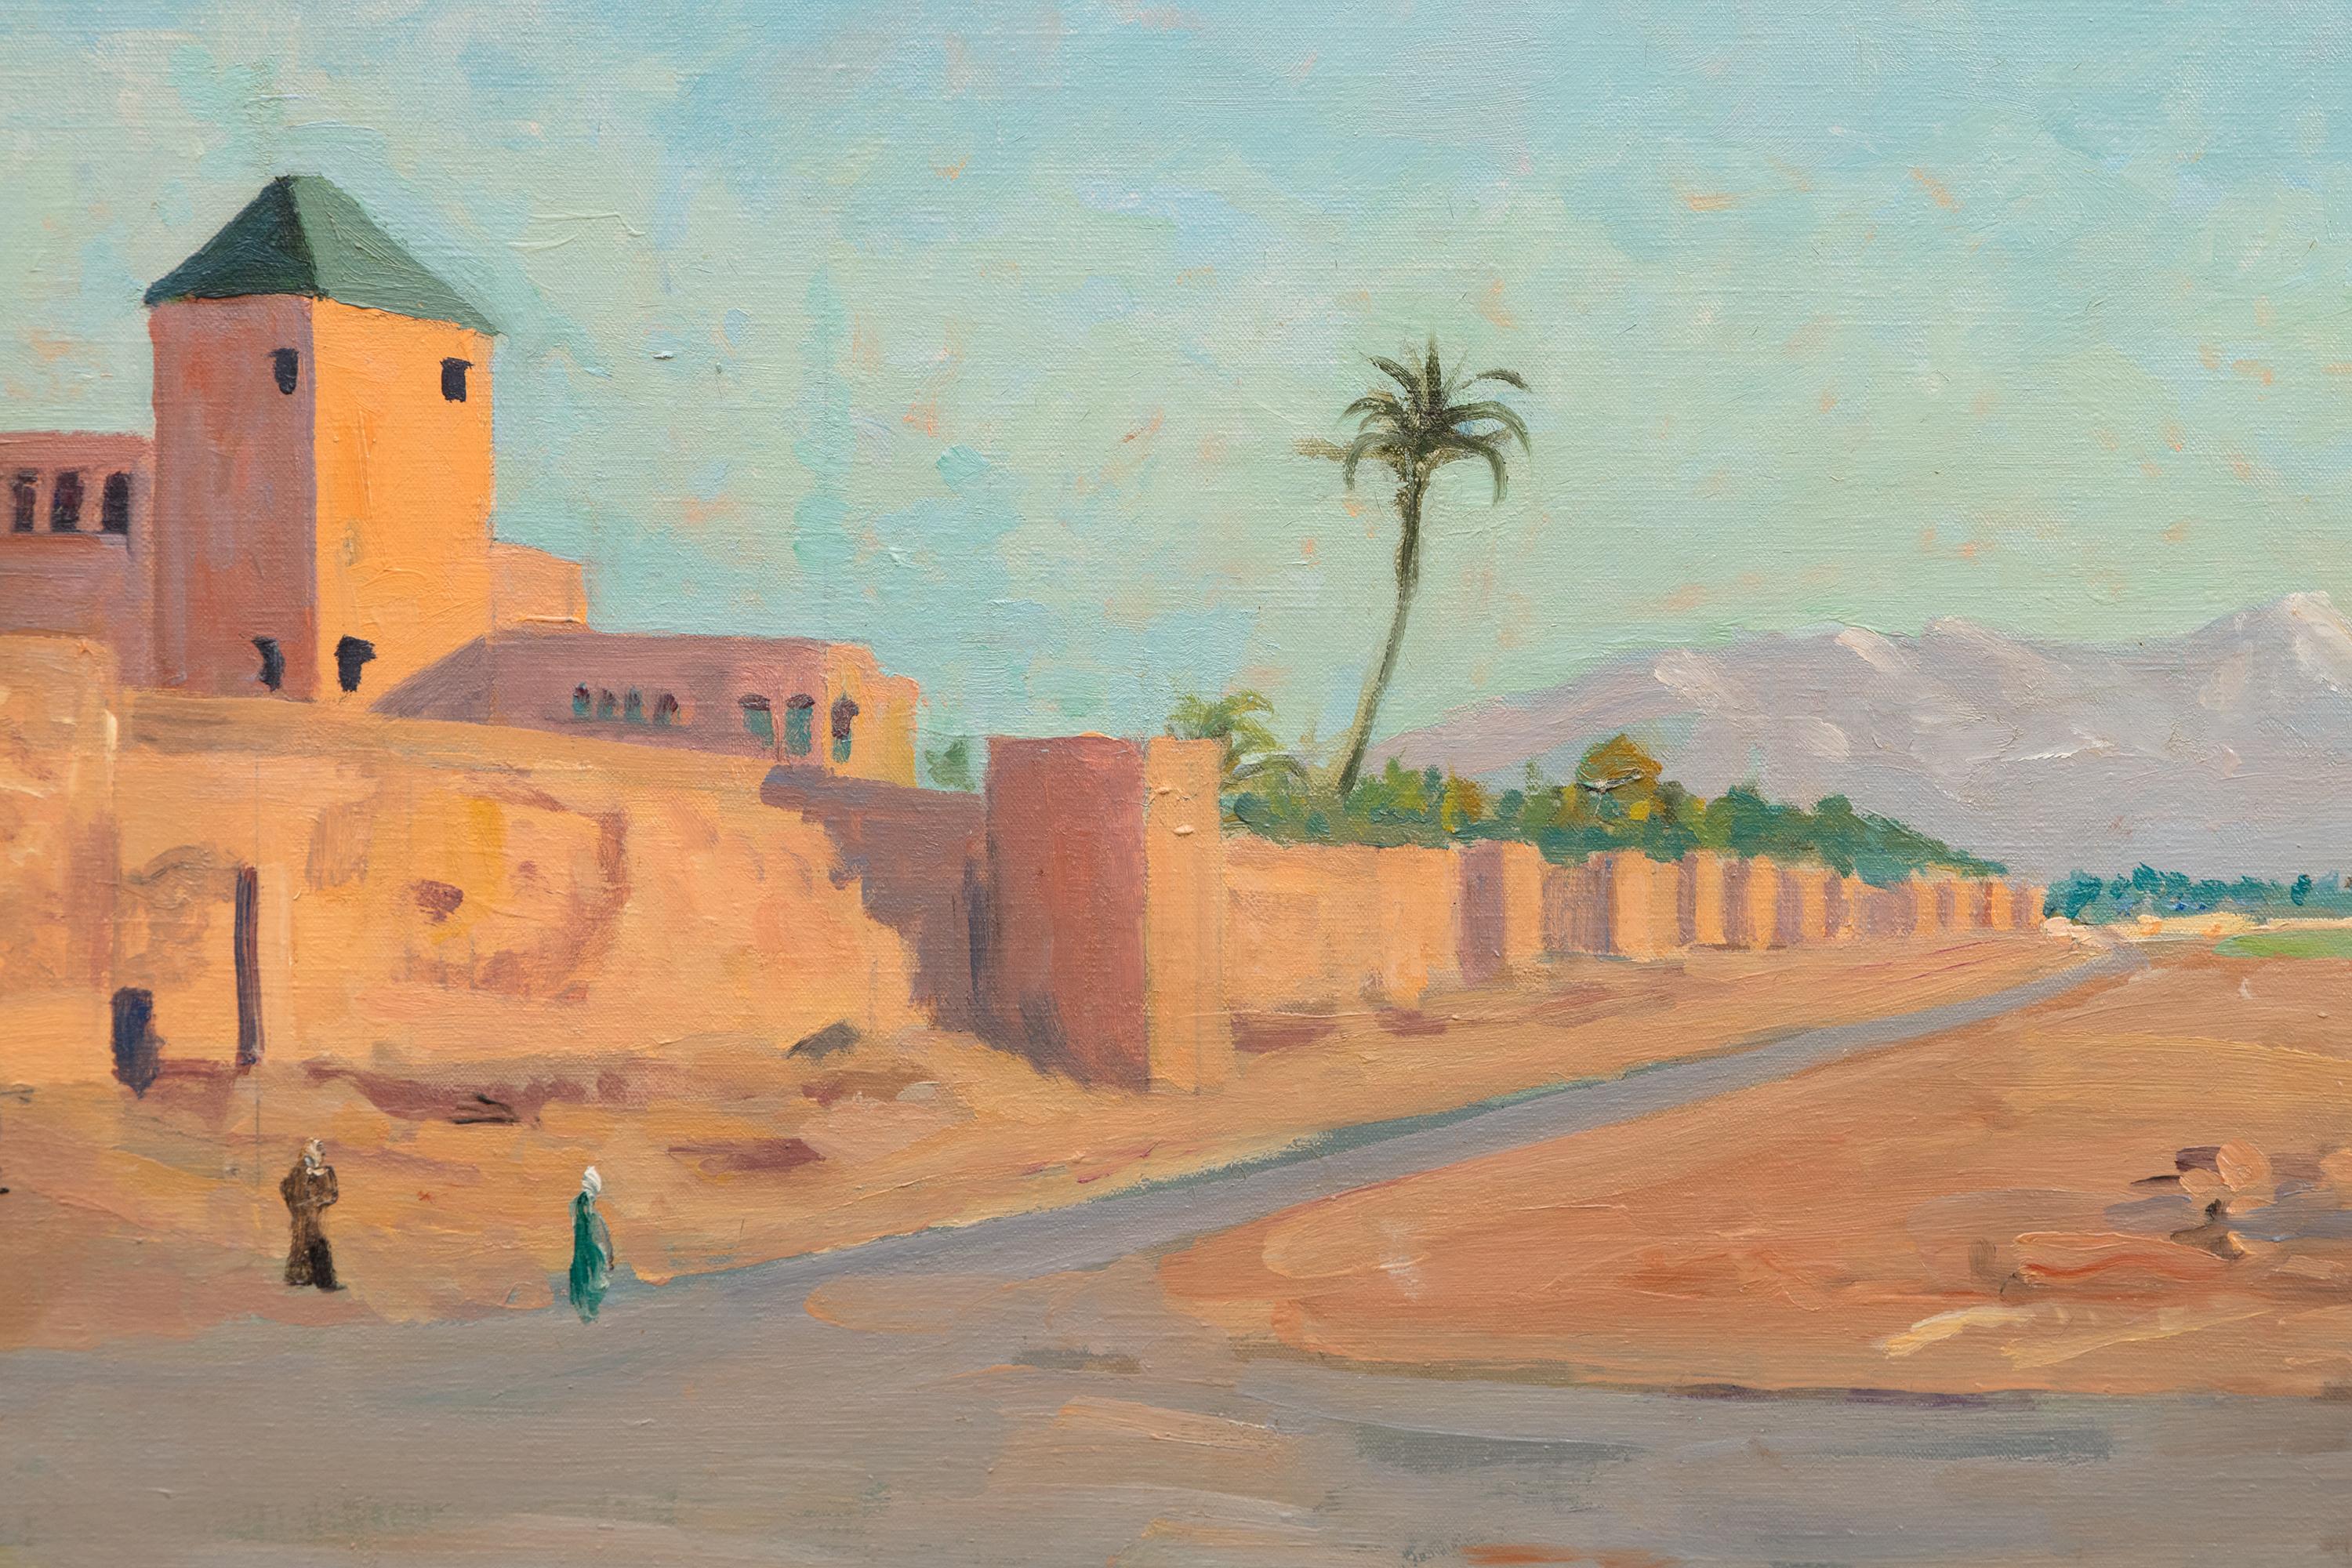 Marrakech with a Camel - Impressionist Painting by Winston Churchill